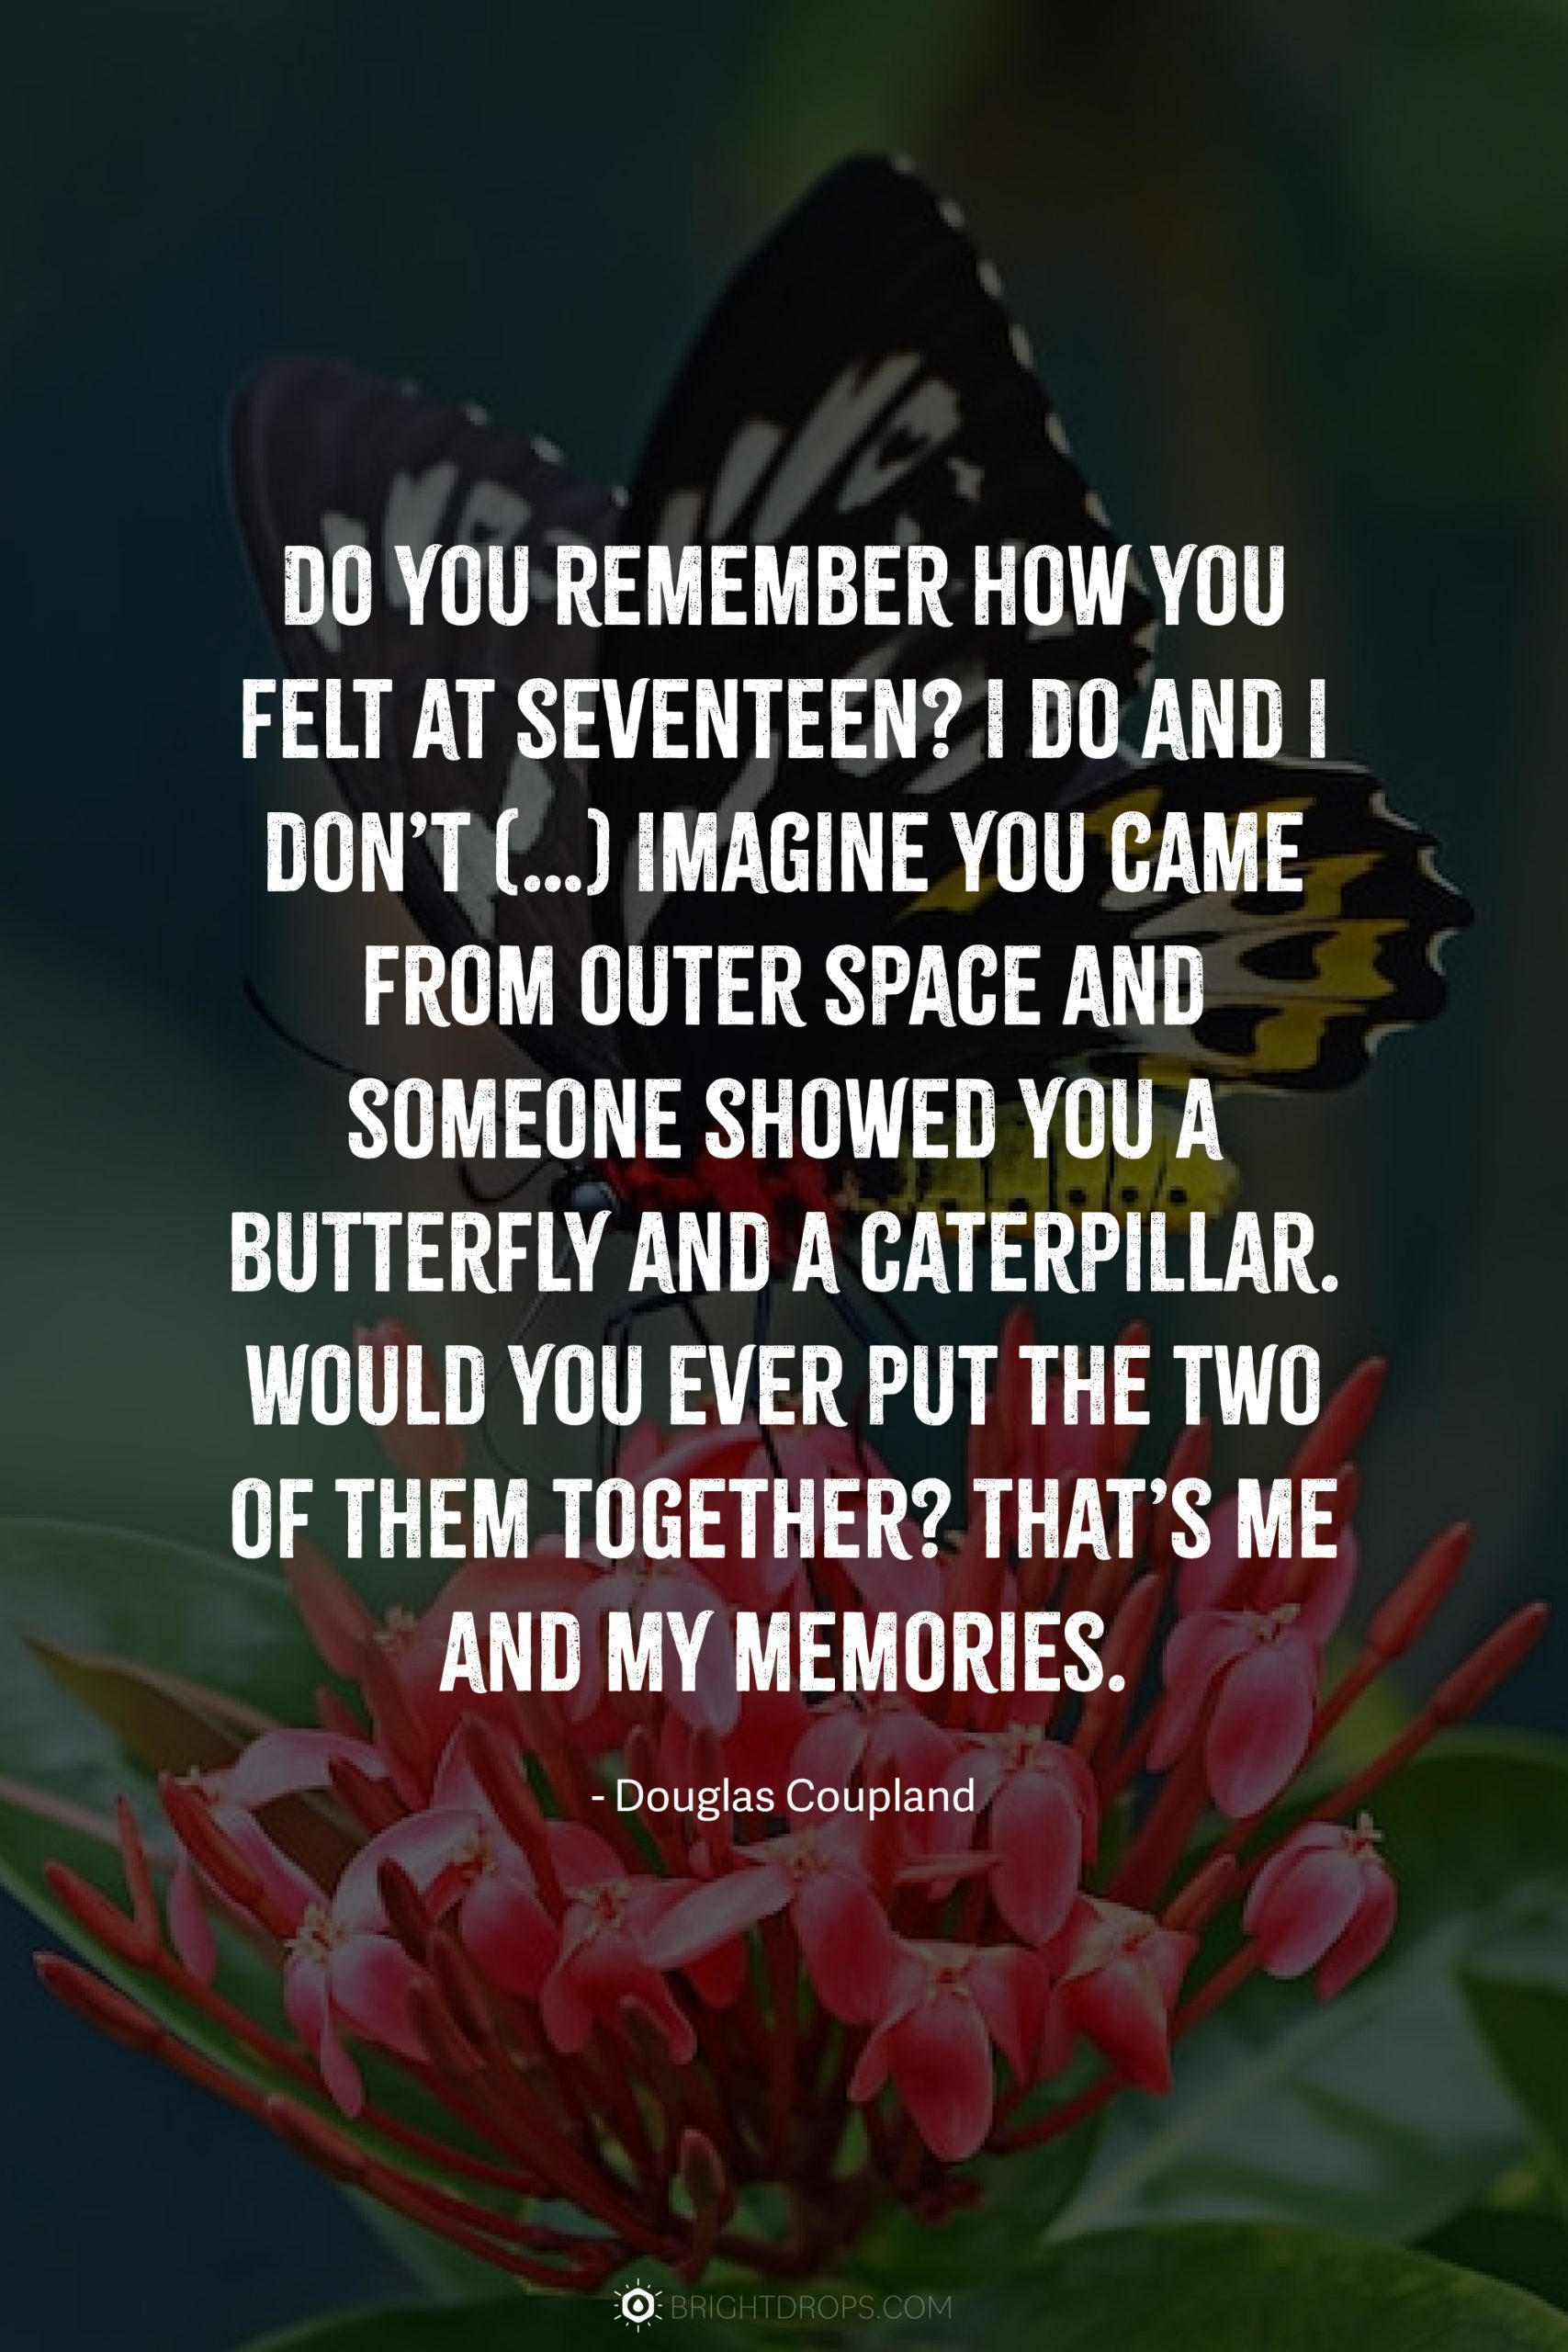 Do you remember how you felt at seventeen? I do and I don’t (…) Imagine you came from outer space and someone showed you a butterfly and a caterpillar. Would you ever put the two of them together? That’s me and my memories.